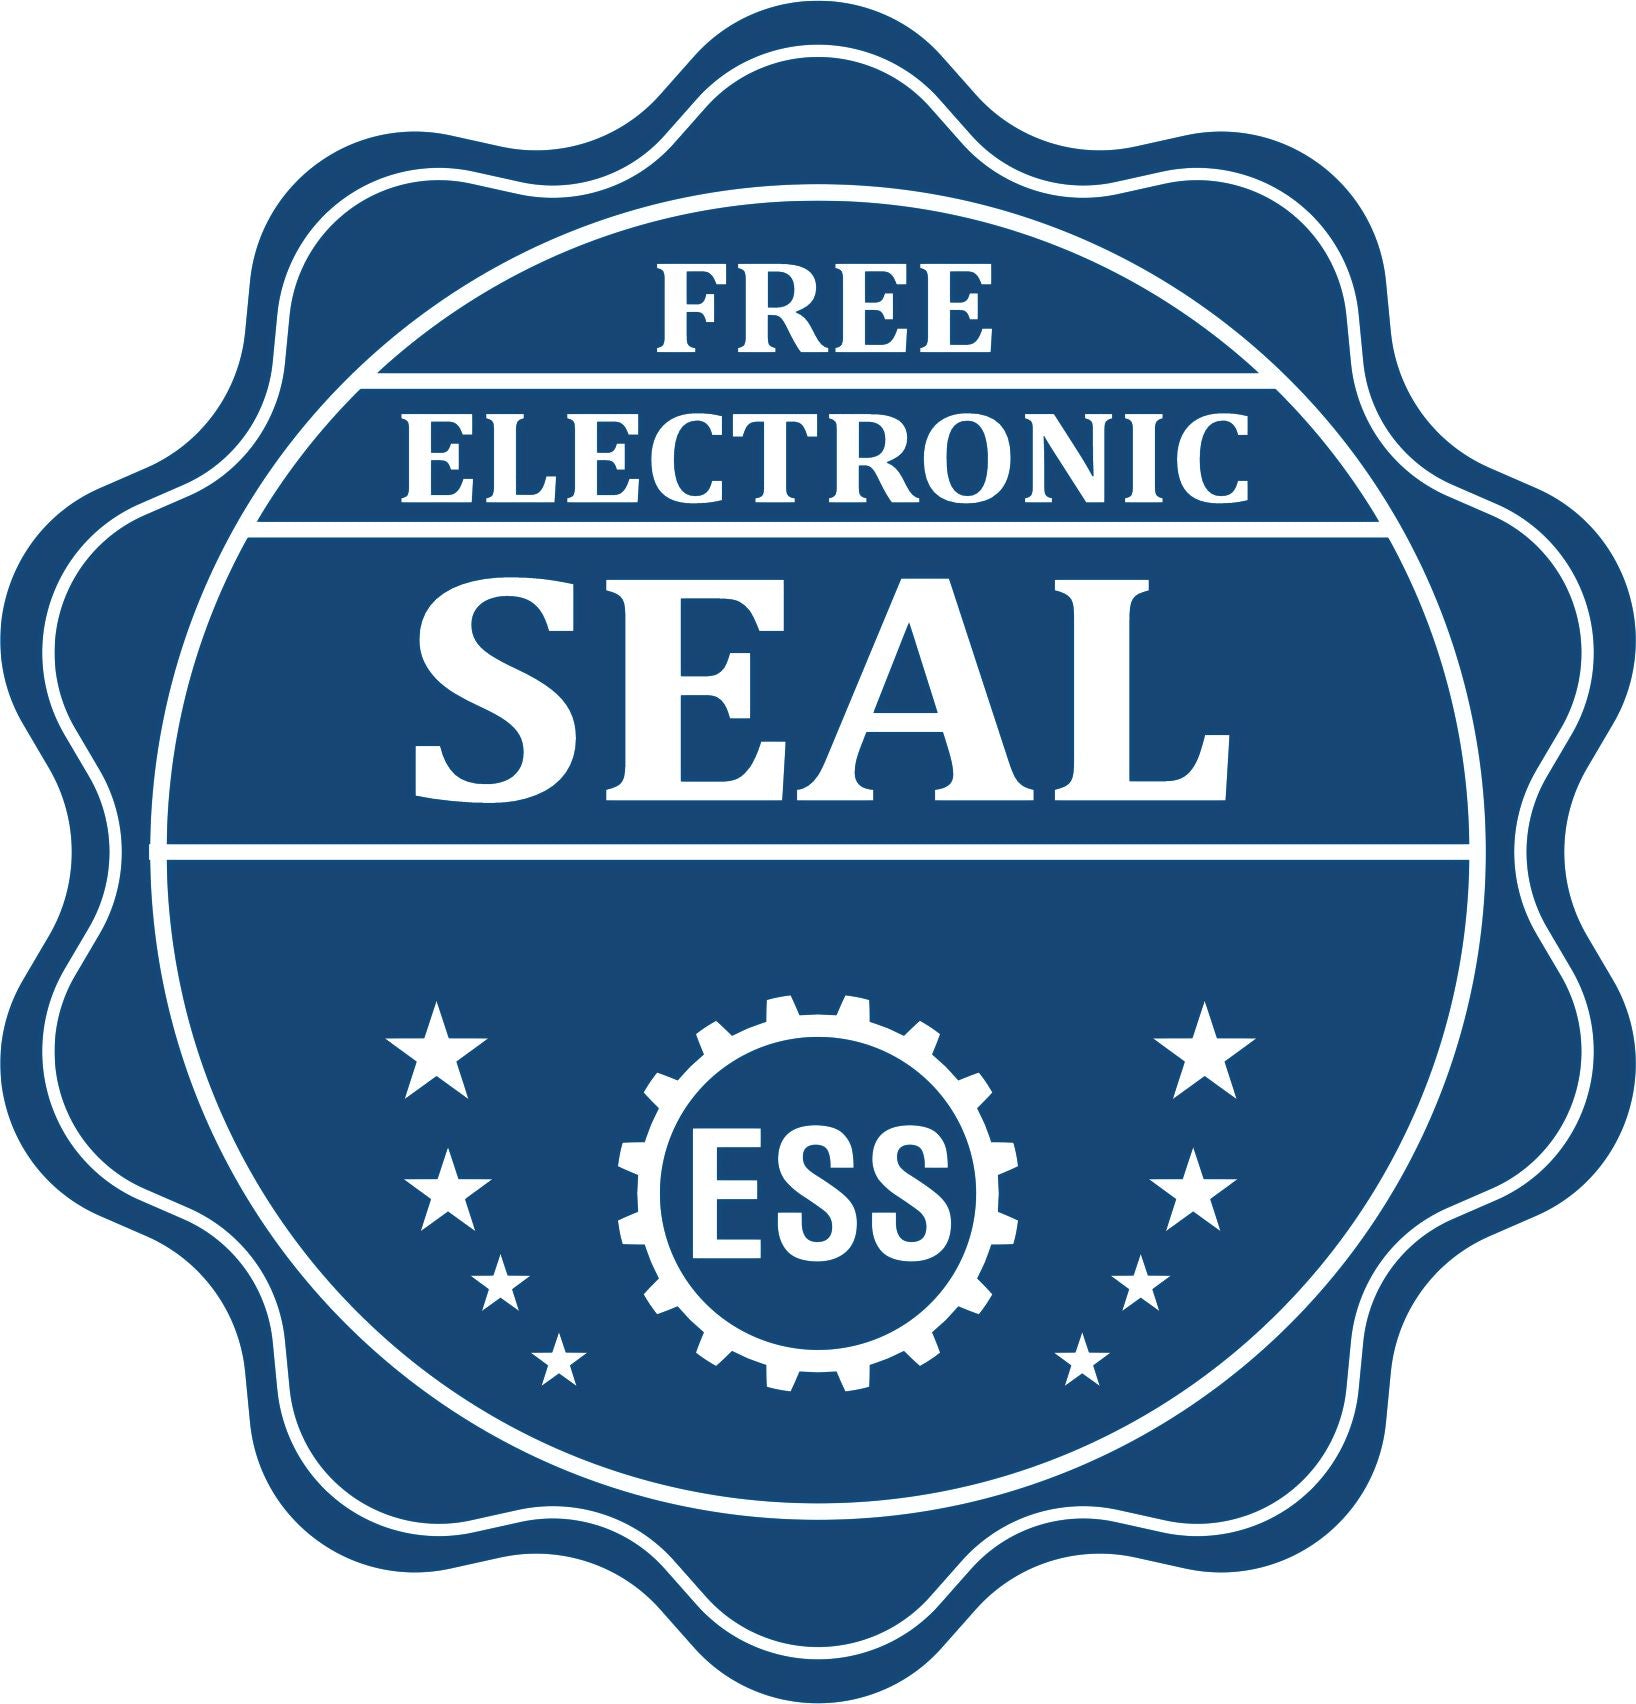 A badge showing a free electronic seal for the Heavy Duty Cast Iron New Mexico Engineer Seal Embosser with stars and the ESS gear on the emblem.